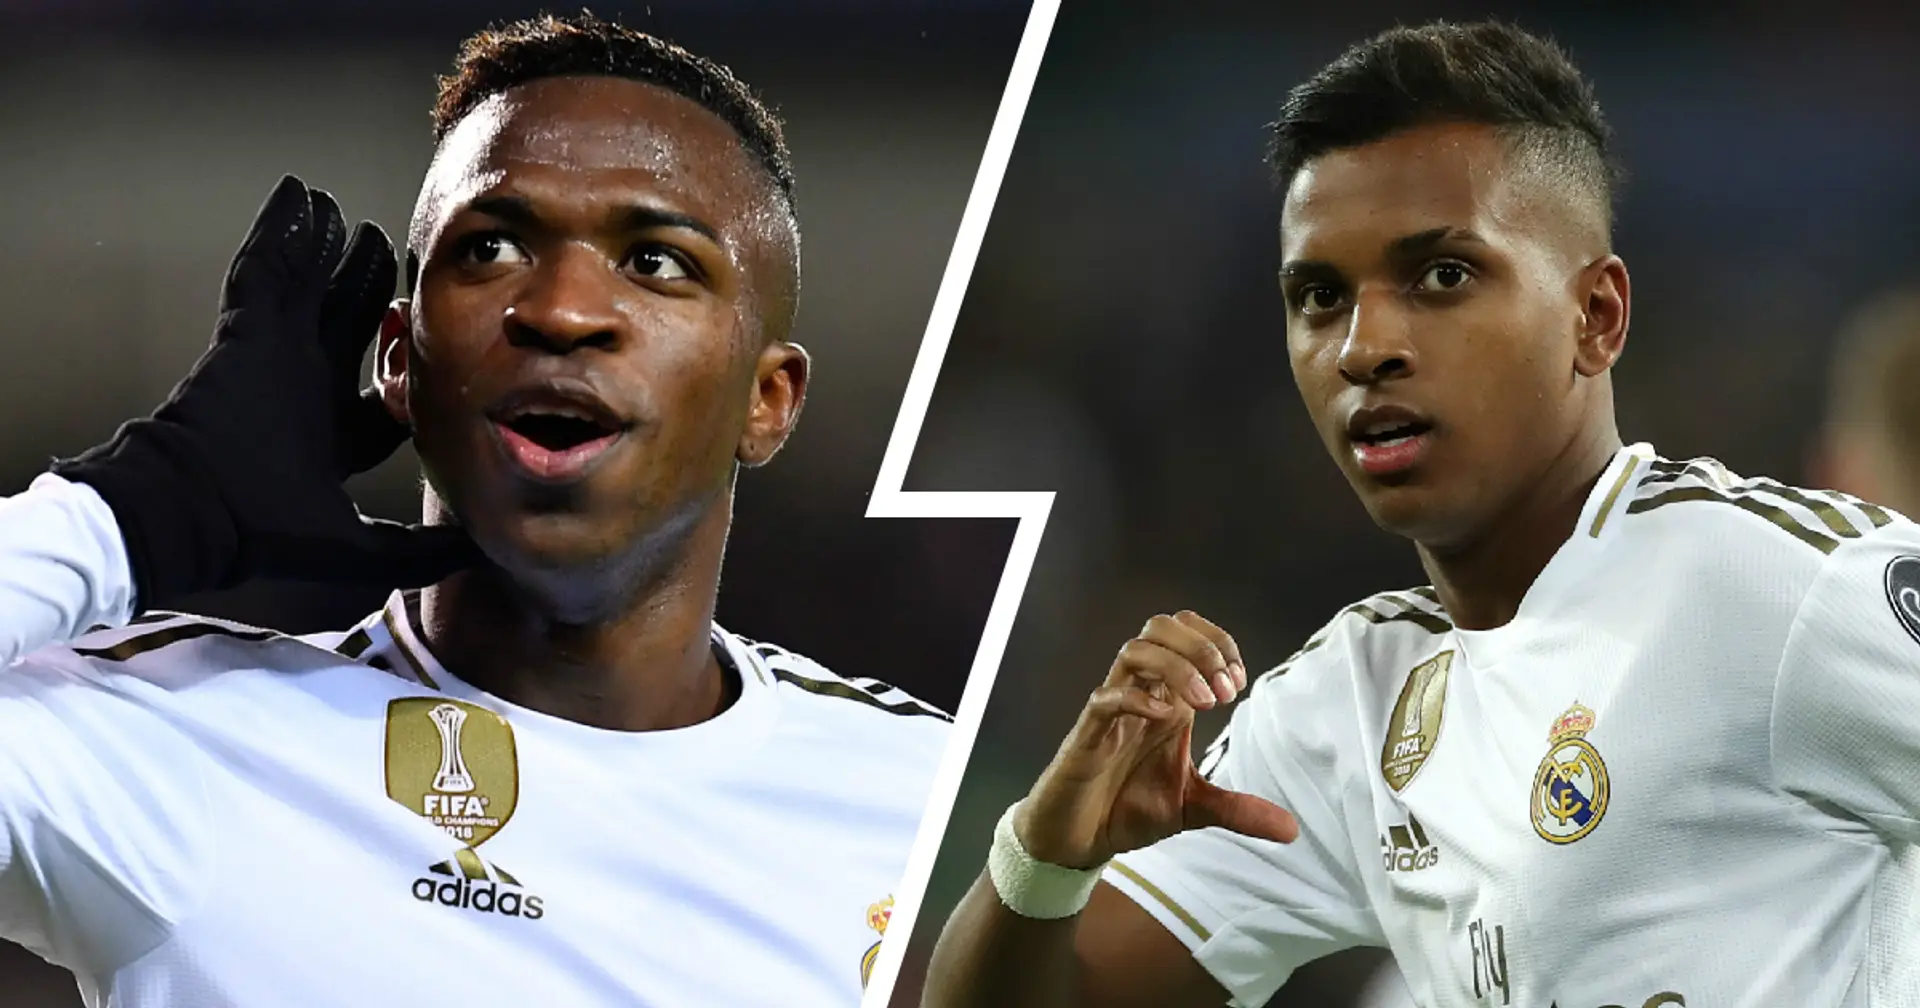 'Rodrygo is more composed, Vinicius is more explosive': Madridista perfectly explains why Real Madrid must find a way to use both 